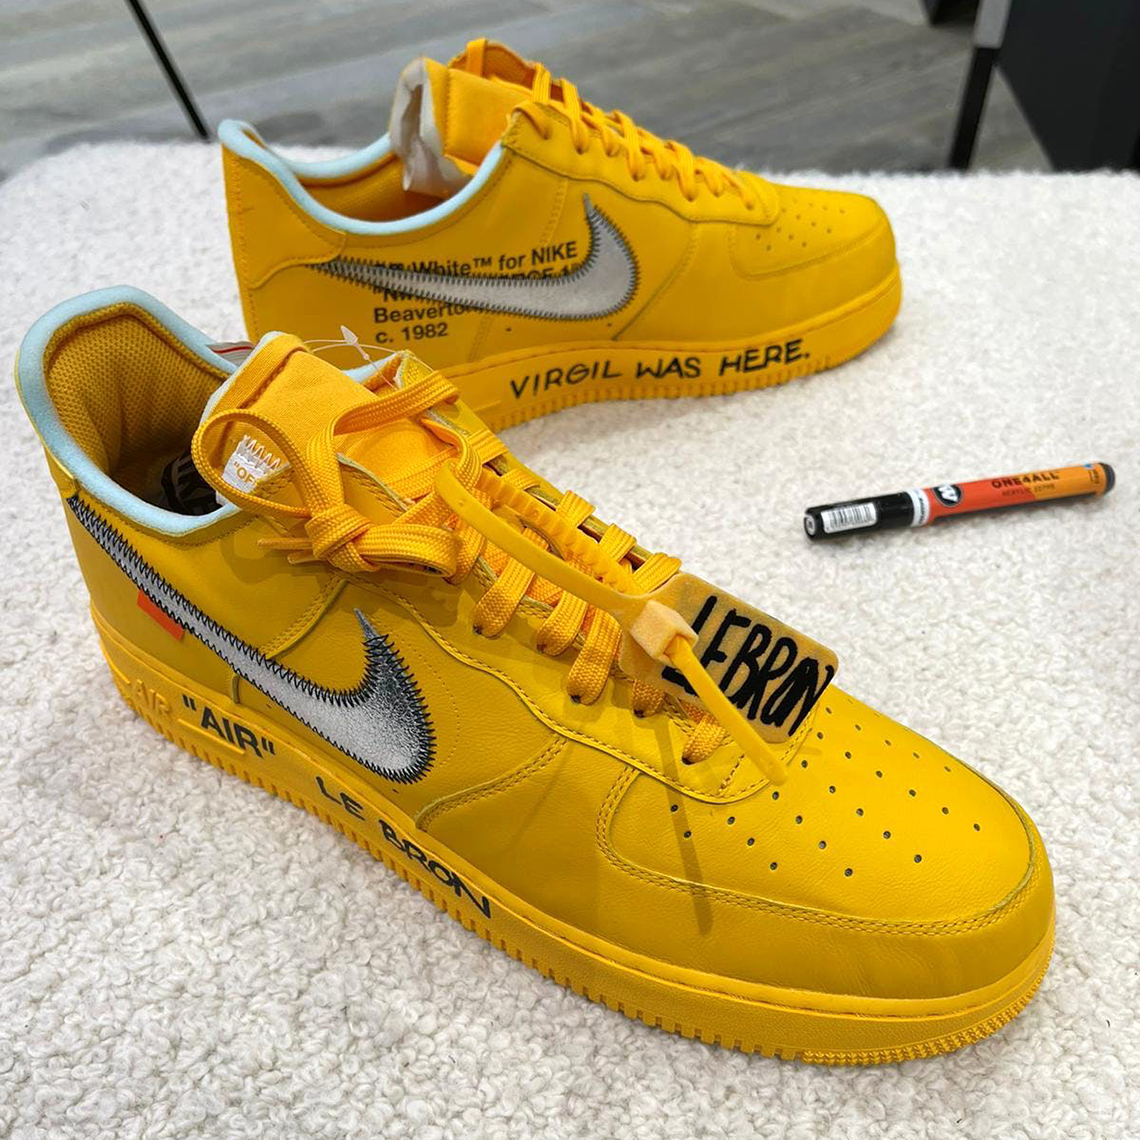 Virgil Abloh’s Signed Off-White x Nike Air Force 1 Low For LeBron James